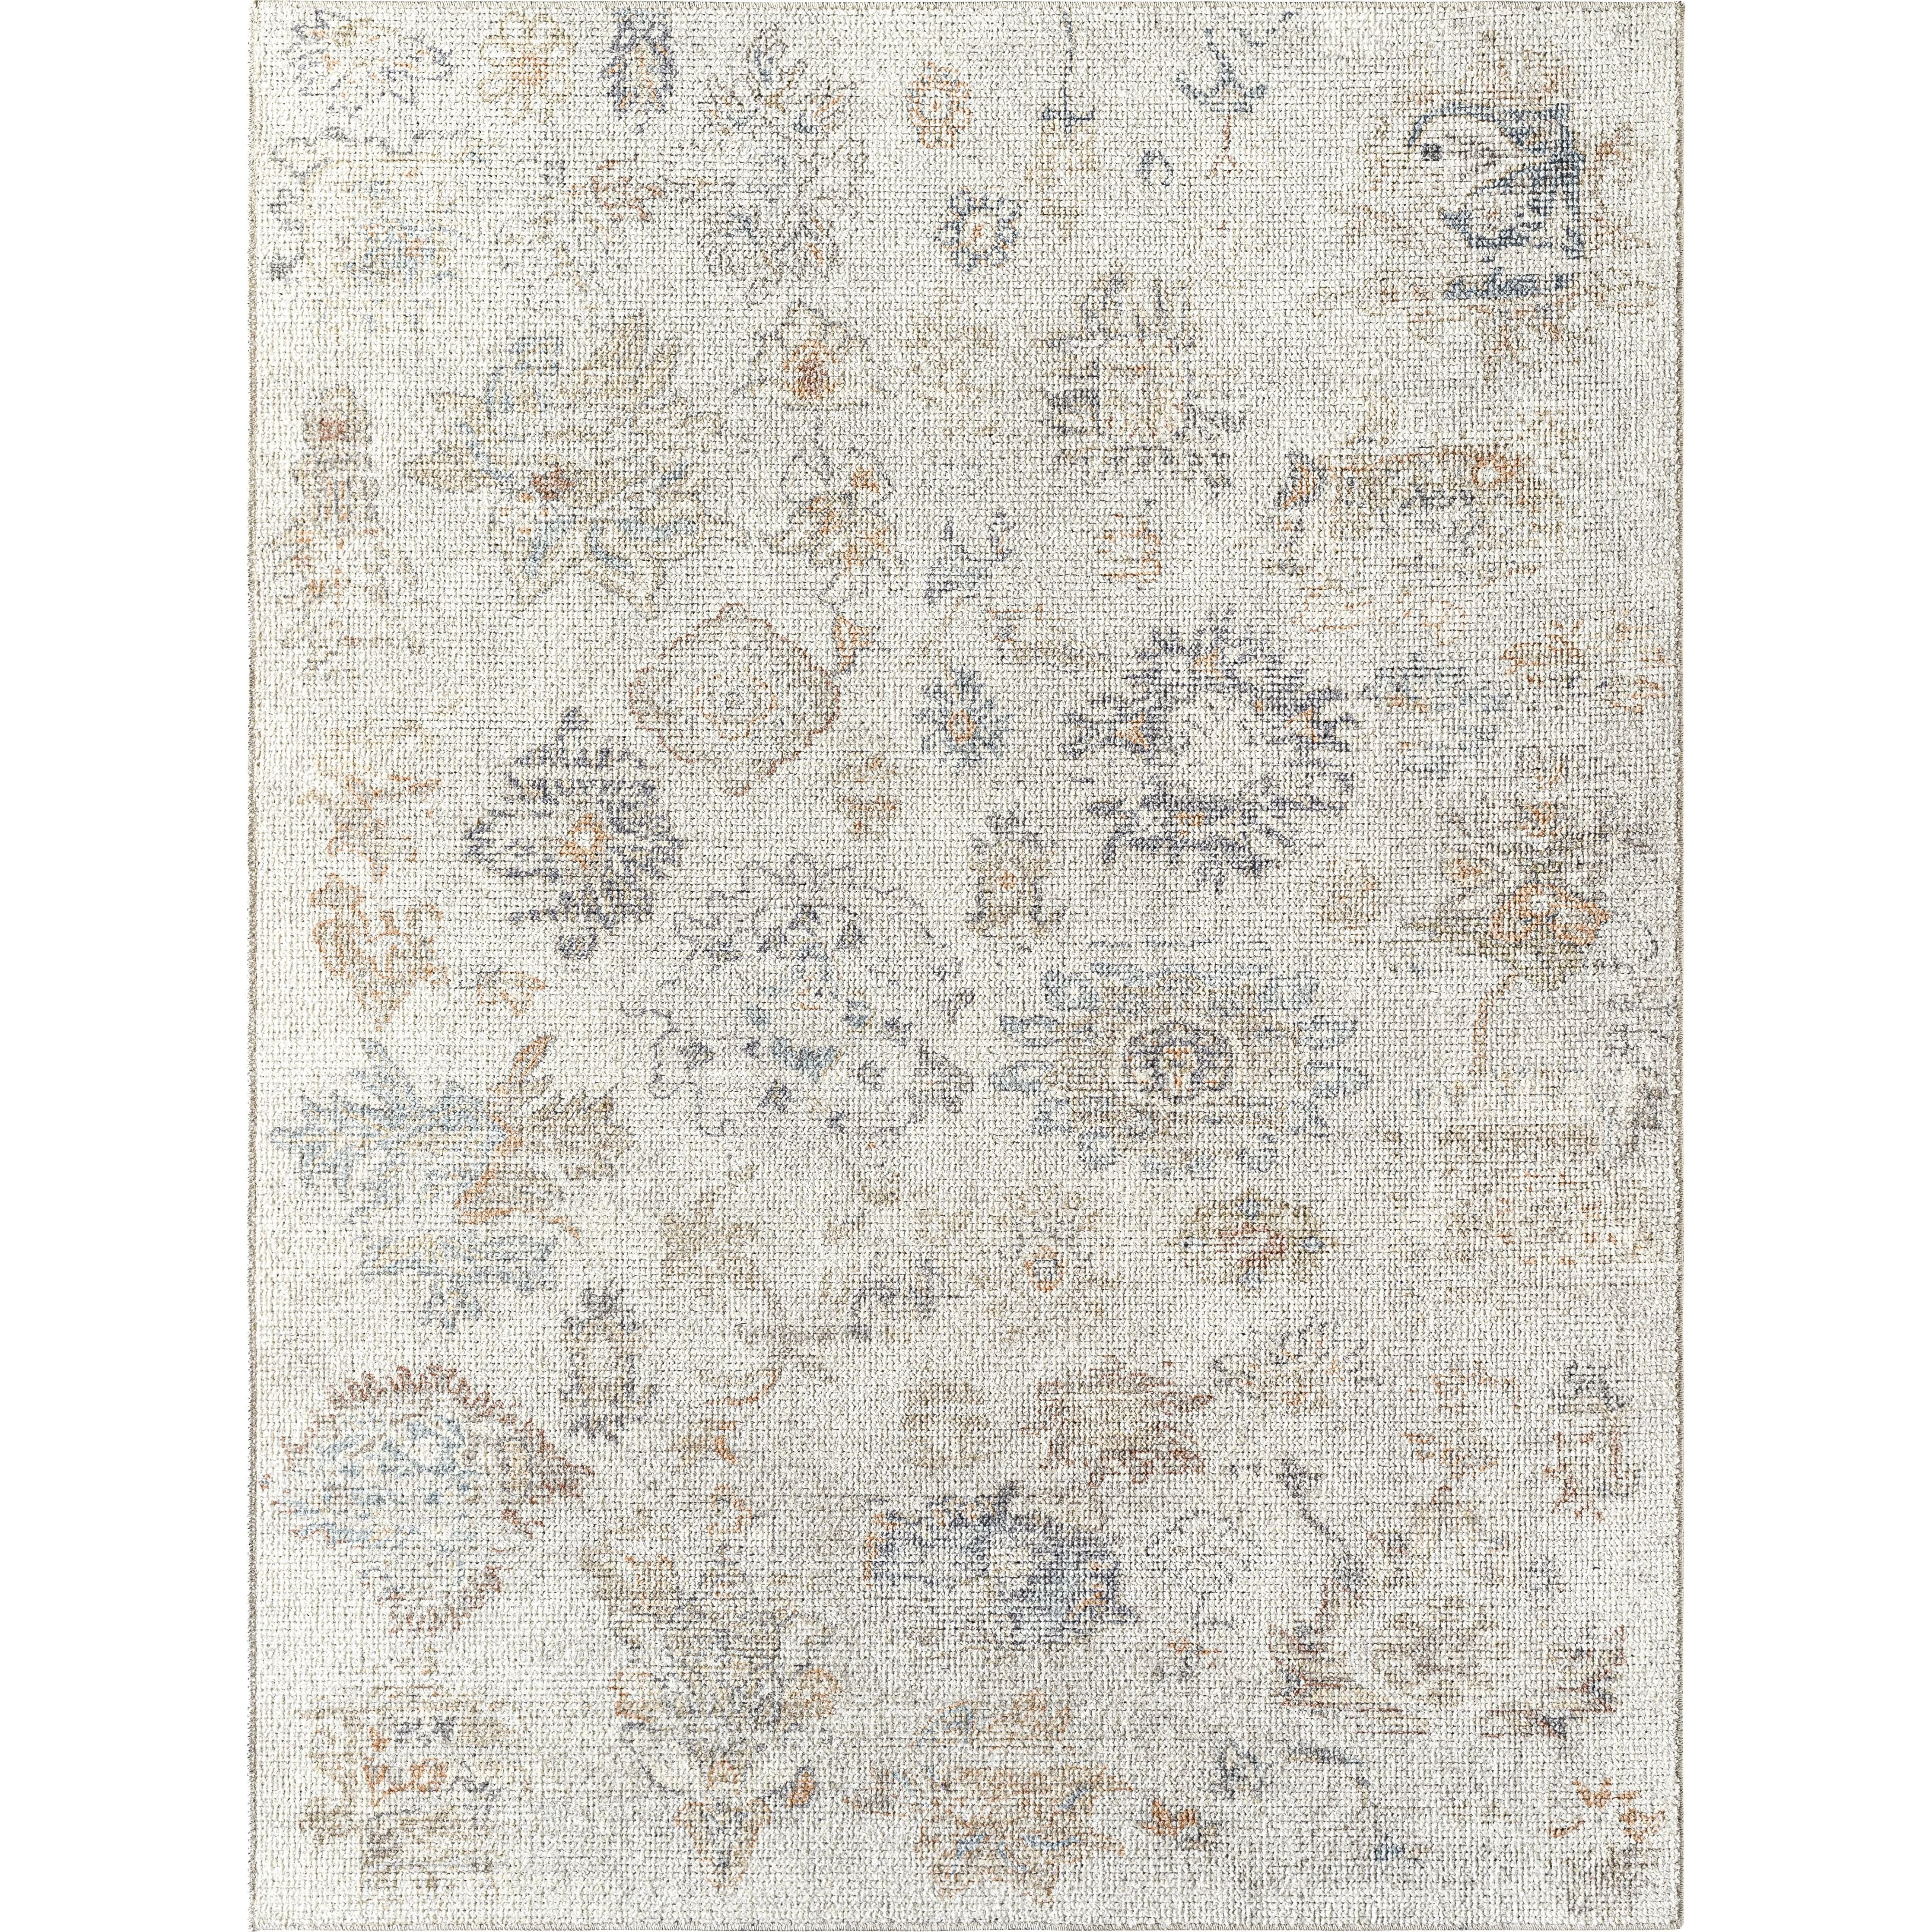 PNW Home x Surya available at Amethyst Home shipping to Australia, UK, and Canada. Organic modern design with easy to clean rugs for a family home in  the Park City metro area.